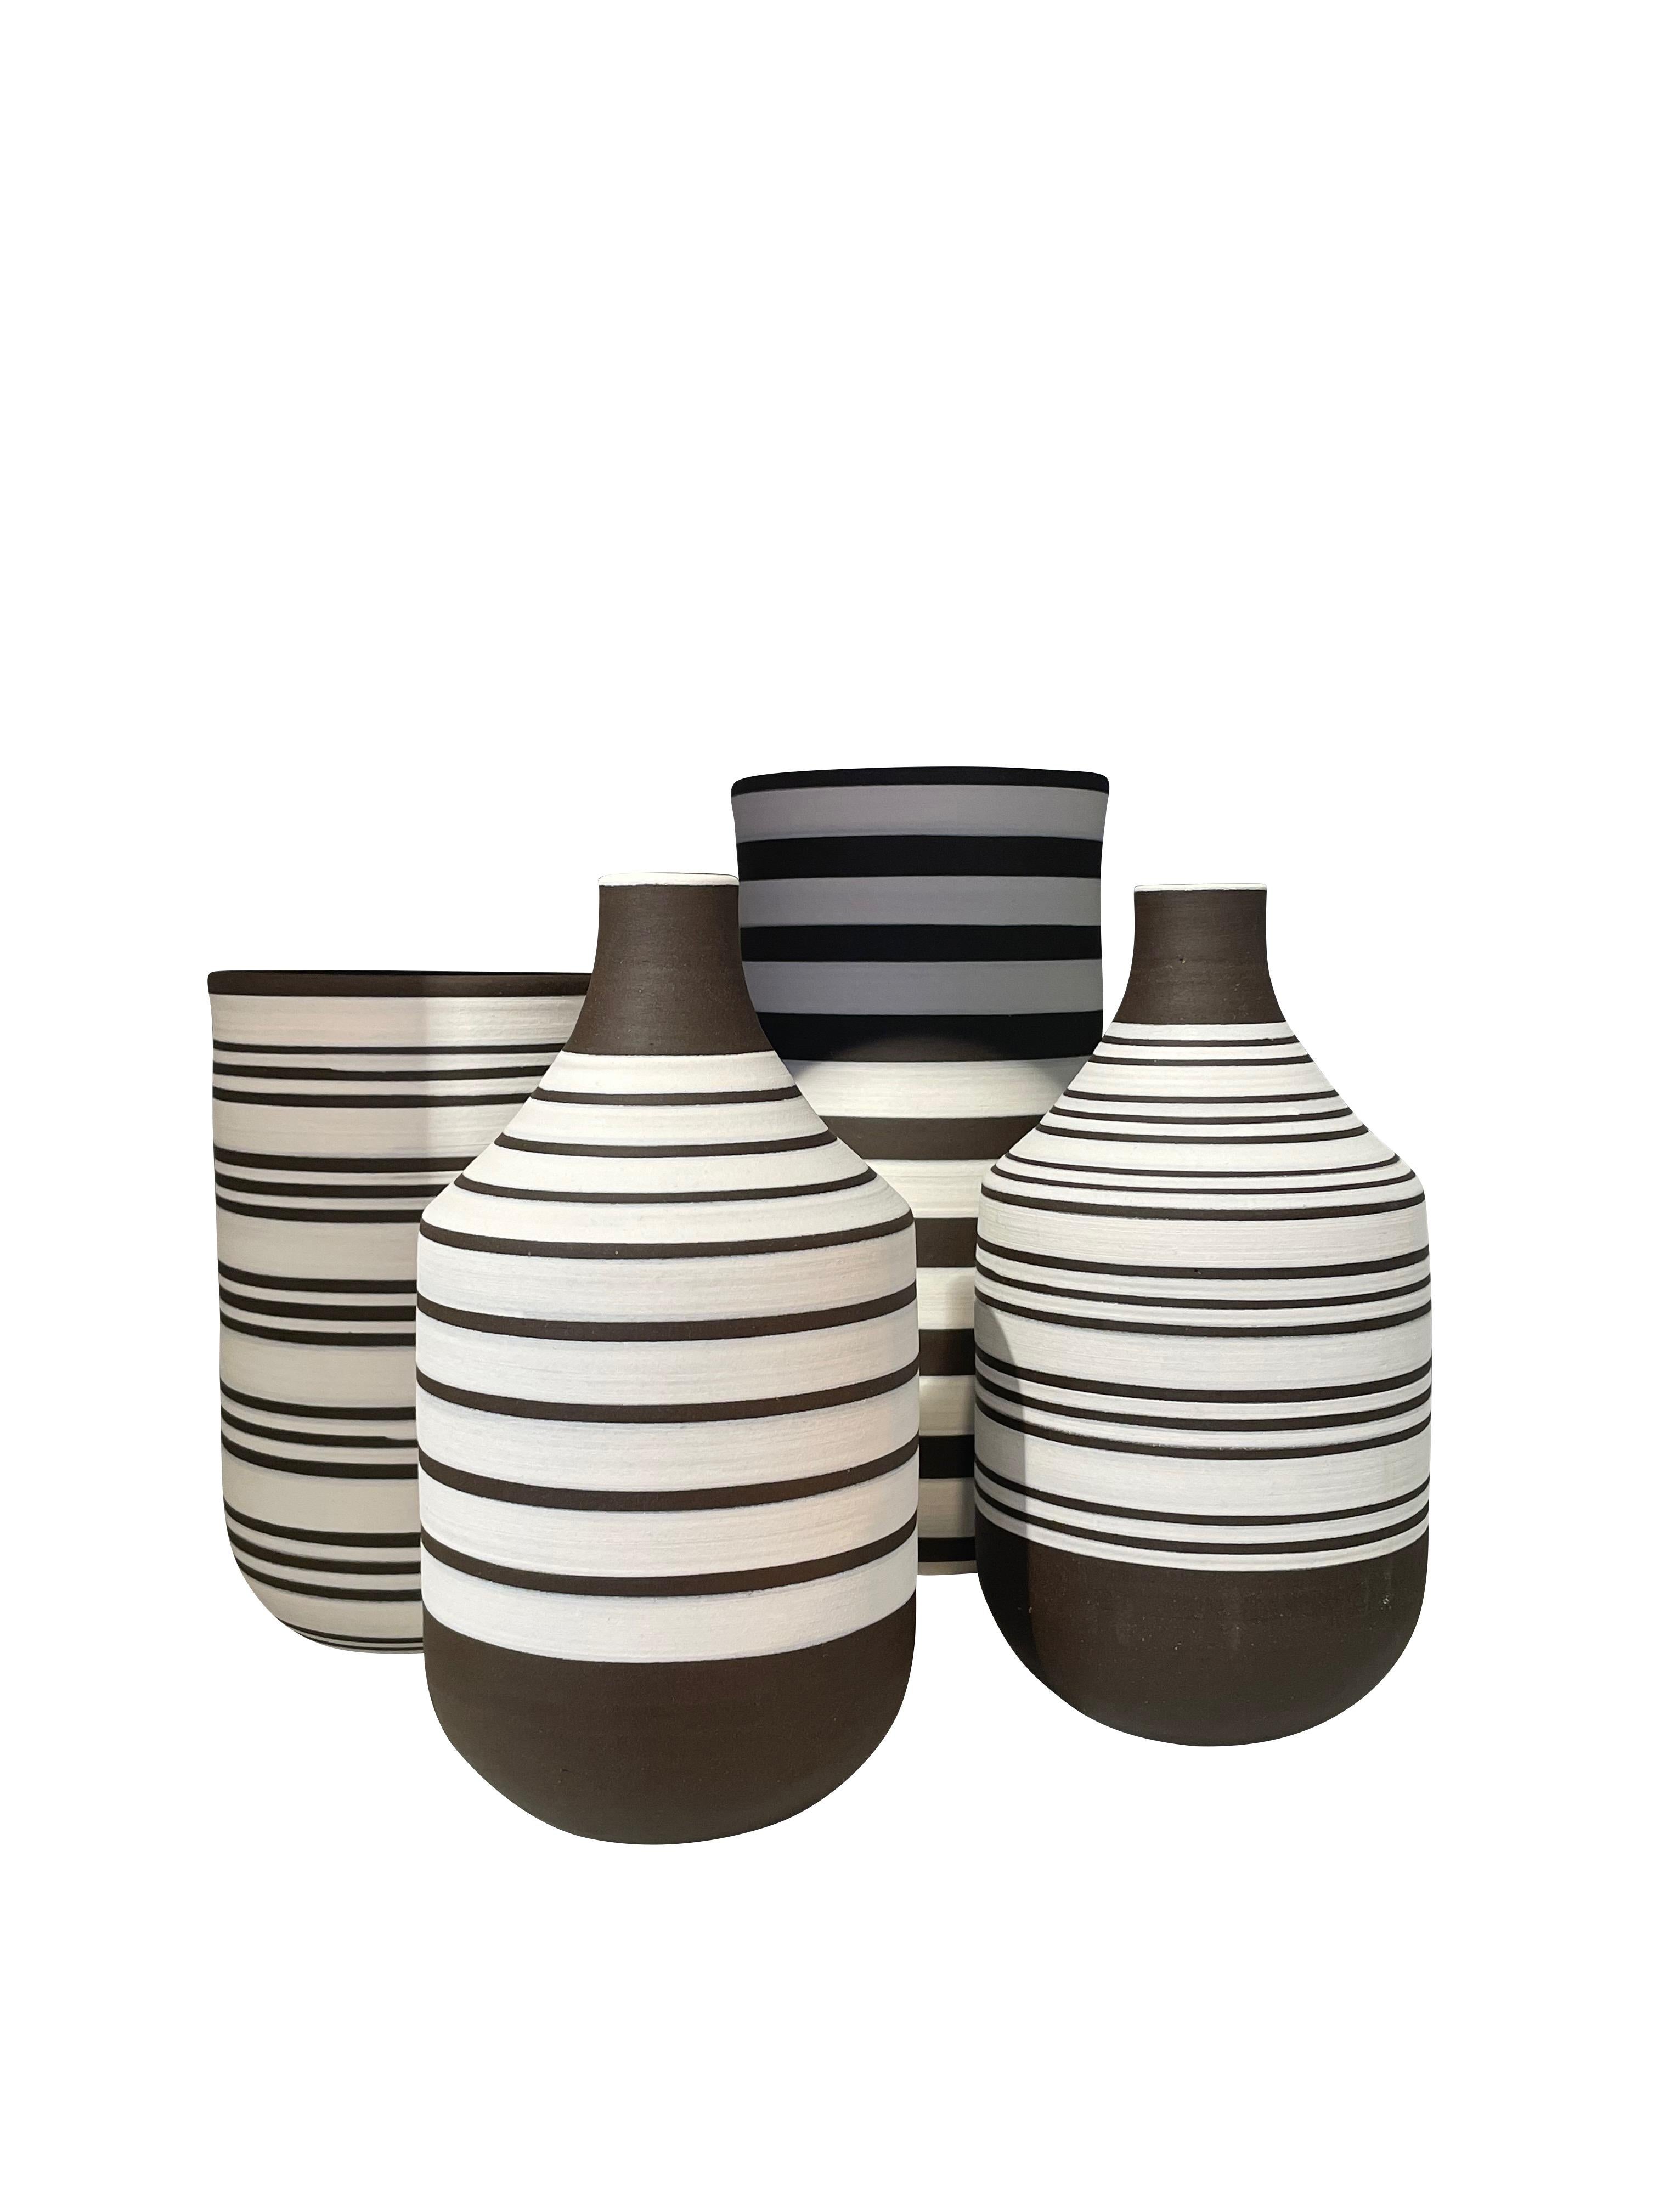 Tall White Ground Triple Dark Brown Stripe Vase, Turkey, Contemporary In New Condition For Sale In New York, NY